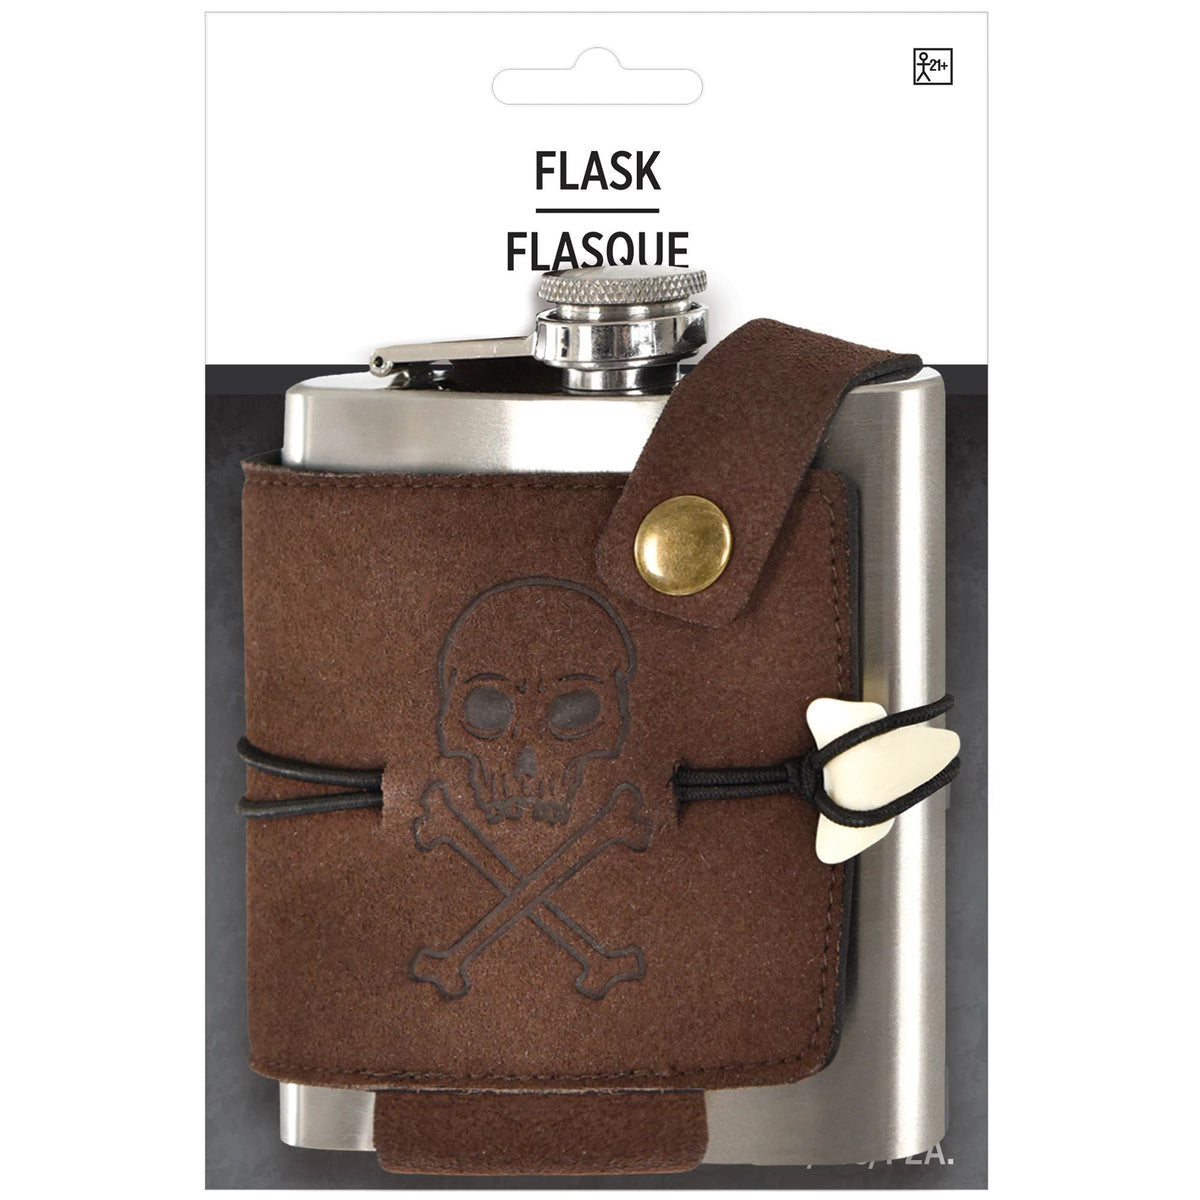 HALLOWEEN COSTUME CO. Costume Accessories Pirate Belt with Flask for Adults